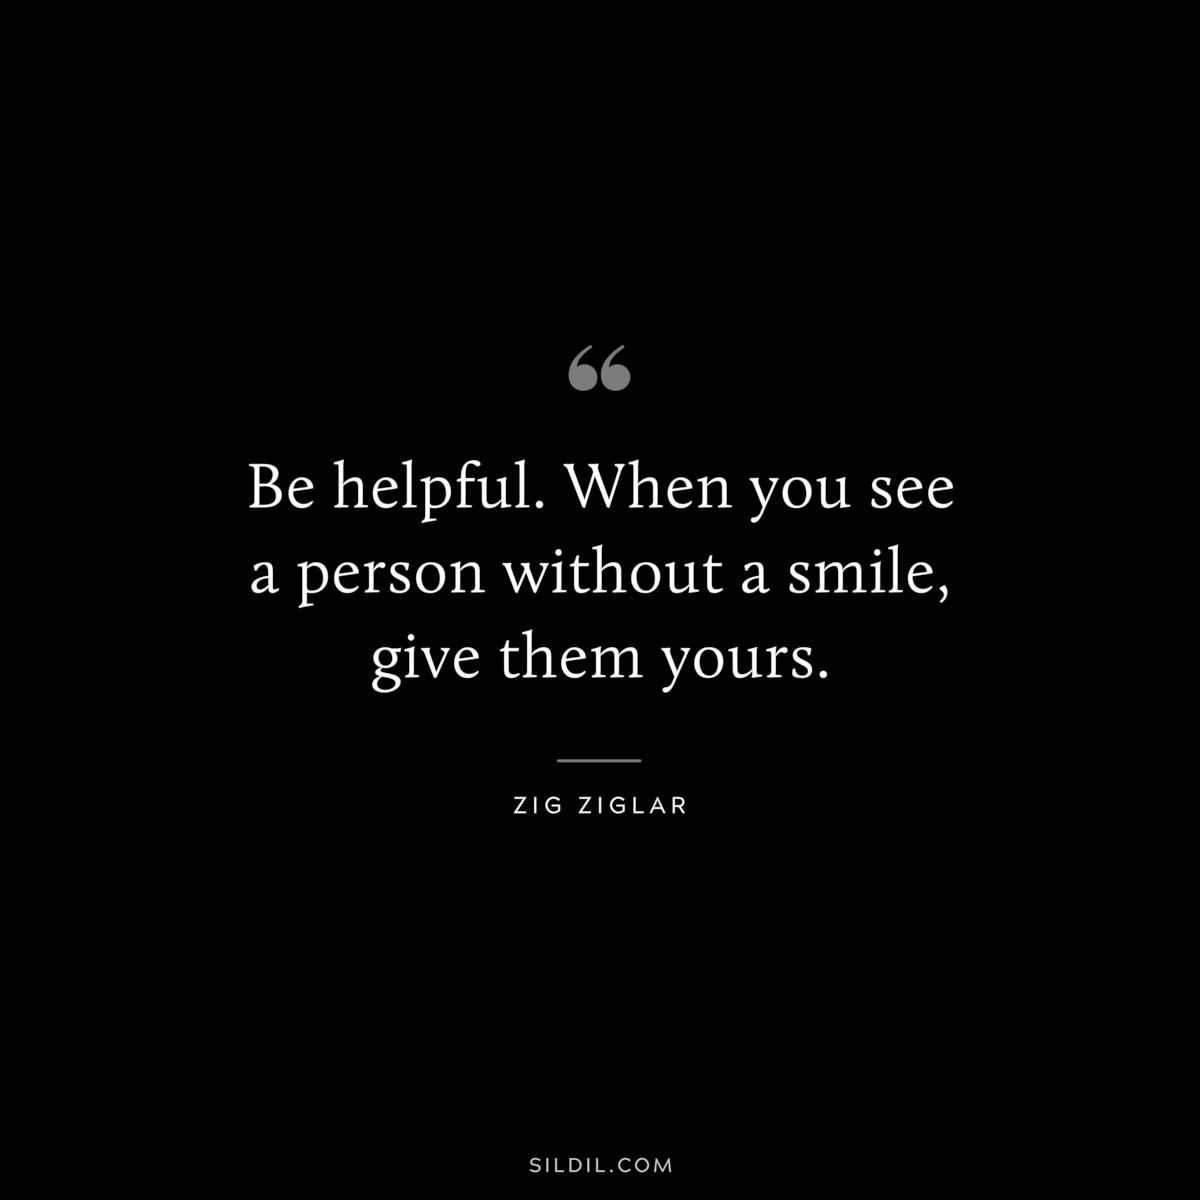 Be helpful. When you see a person without a smile, give them yours. ― Zig Ziglar